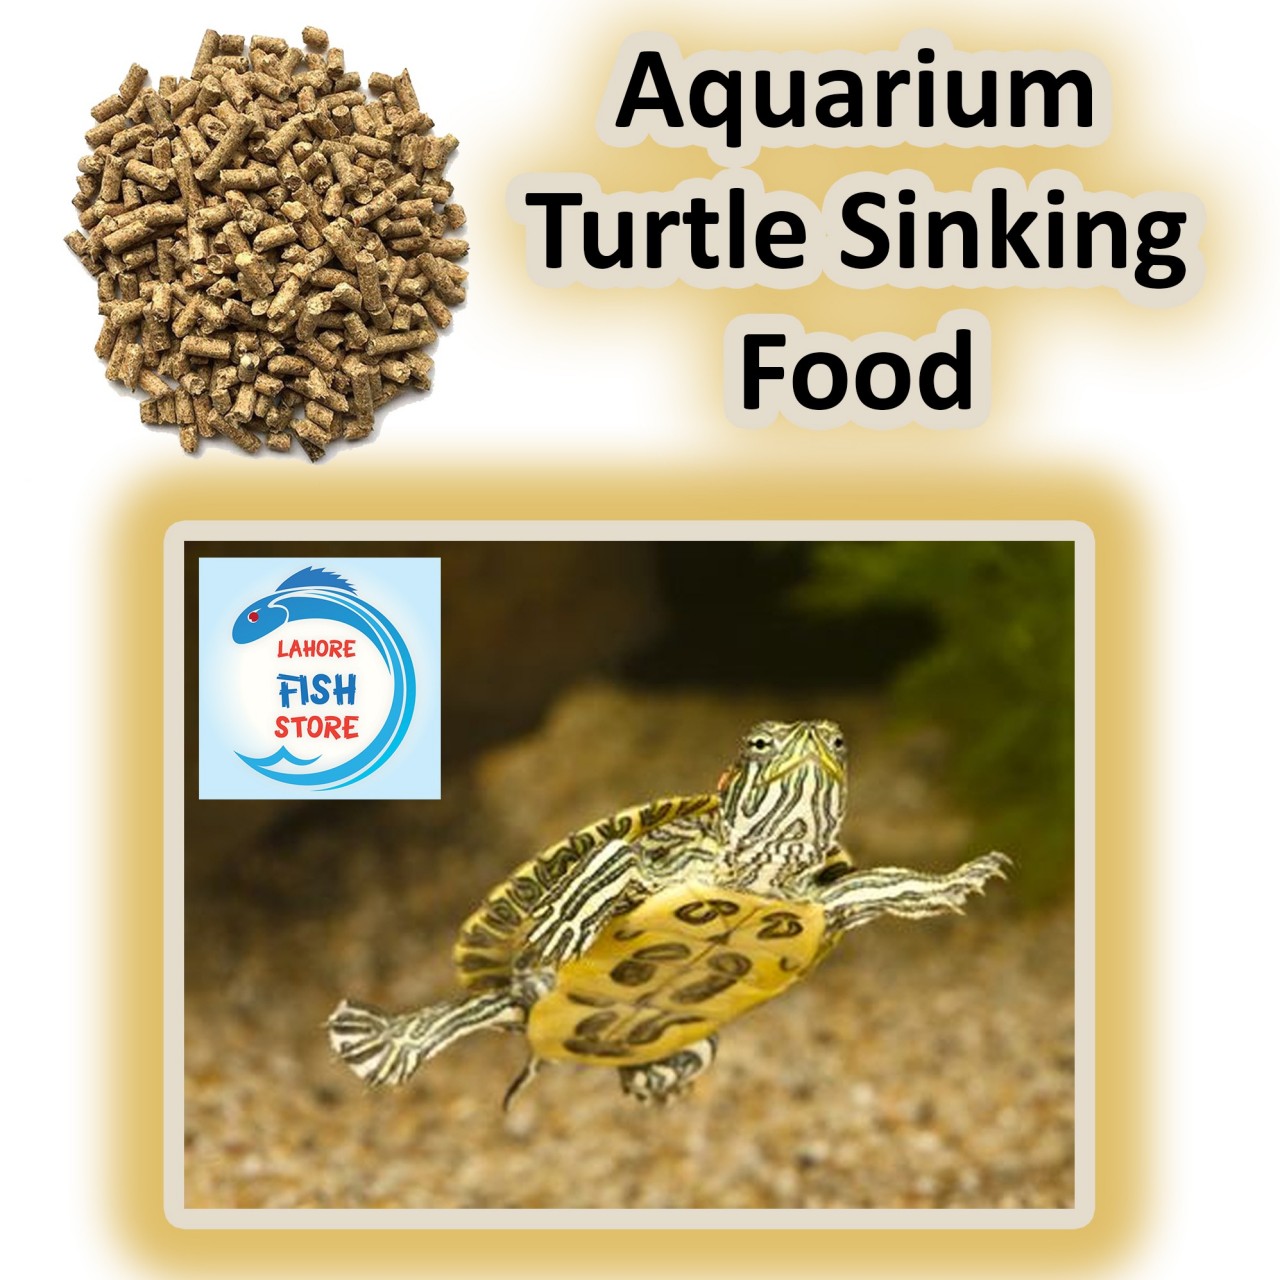 Fish Aquarium Sinking Food Stick - For Turtles and Water Surface Fishes - Premium Pack